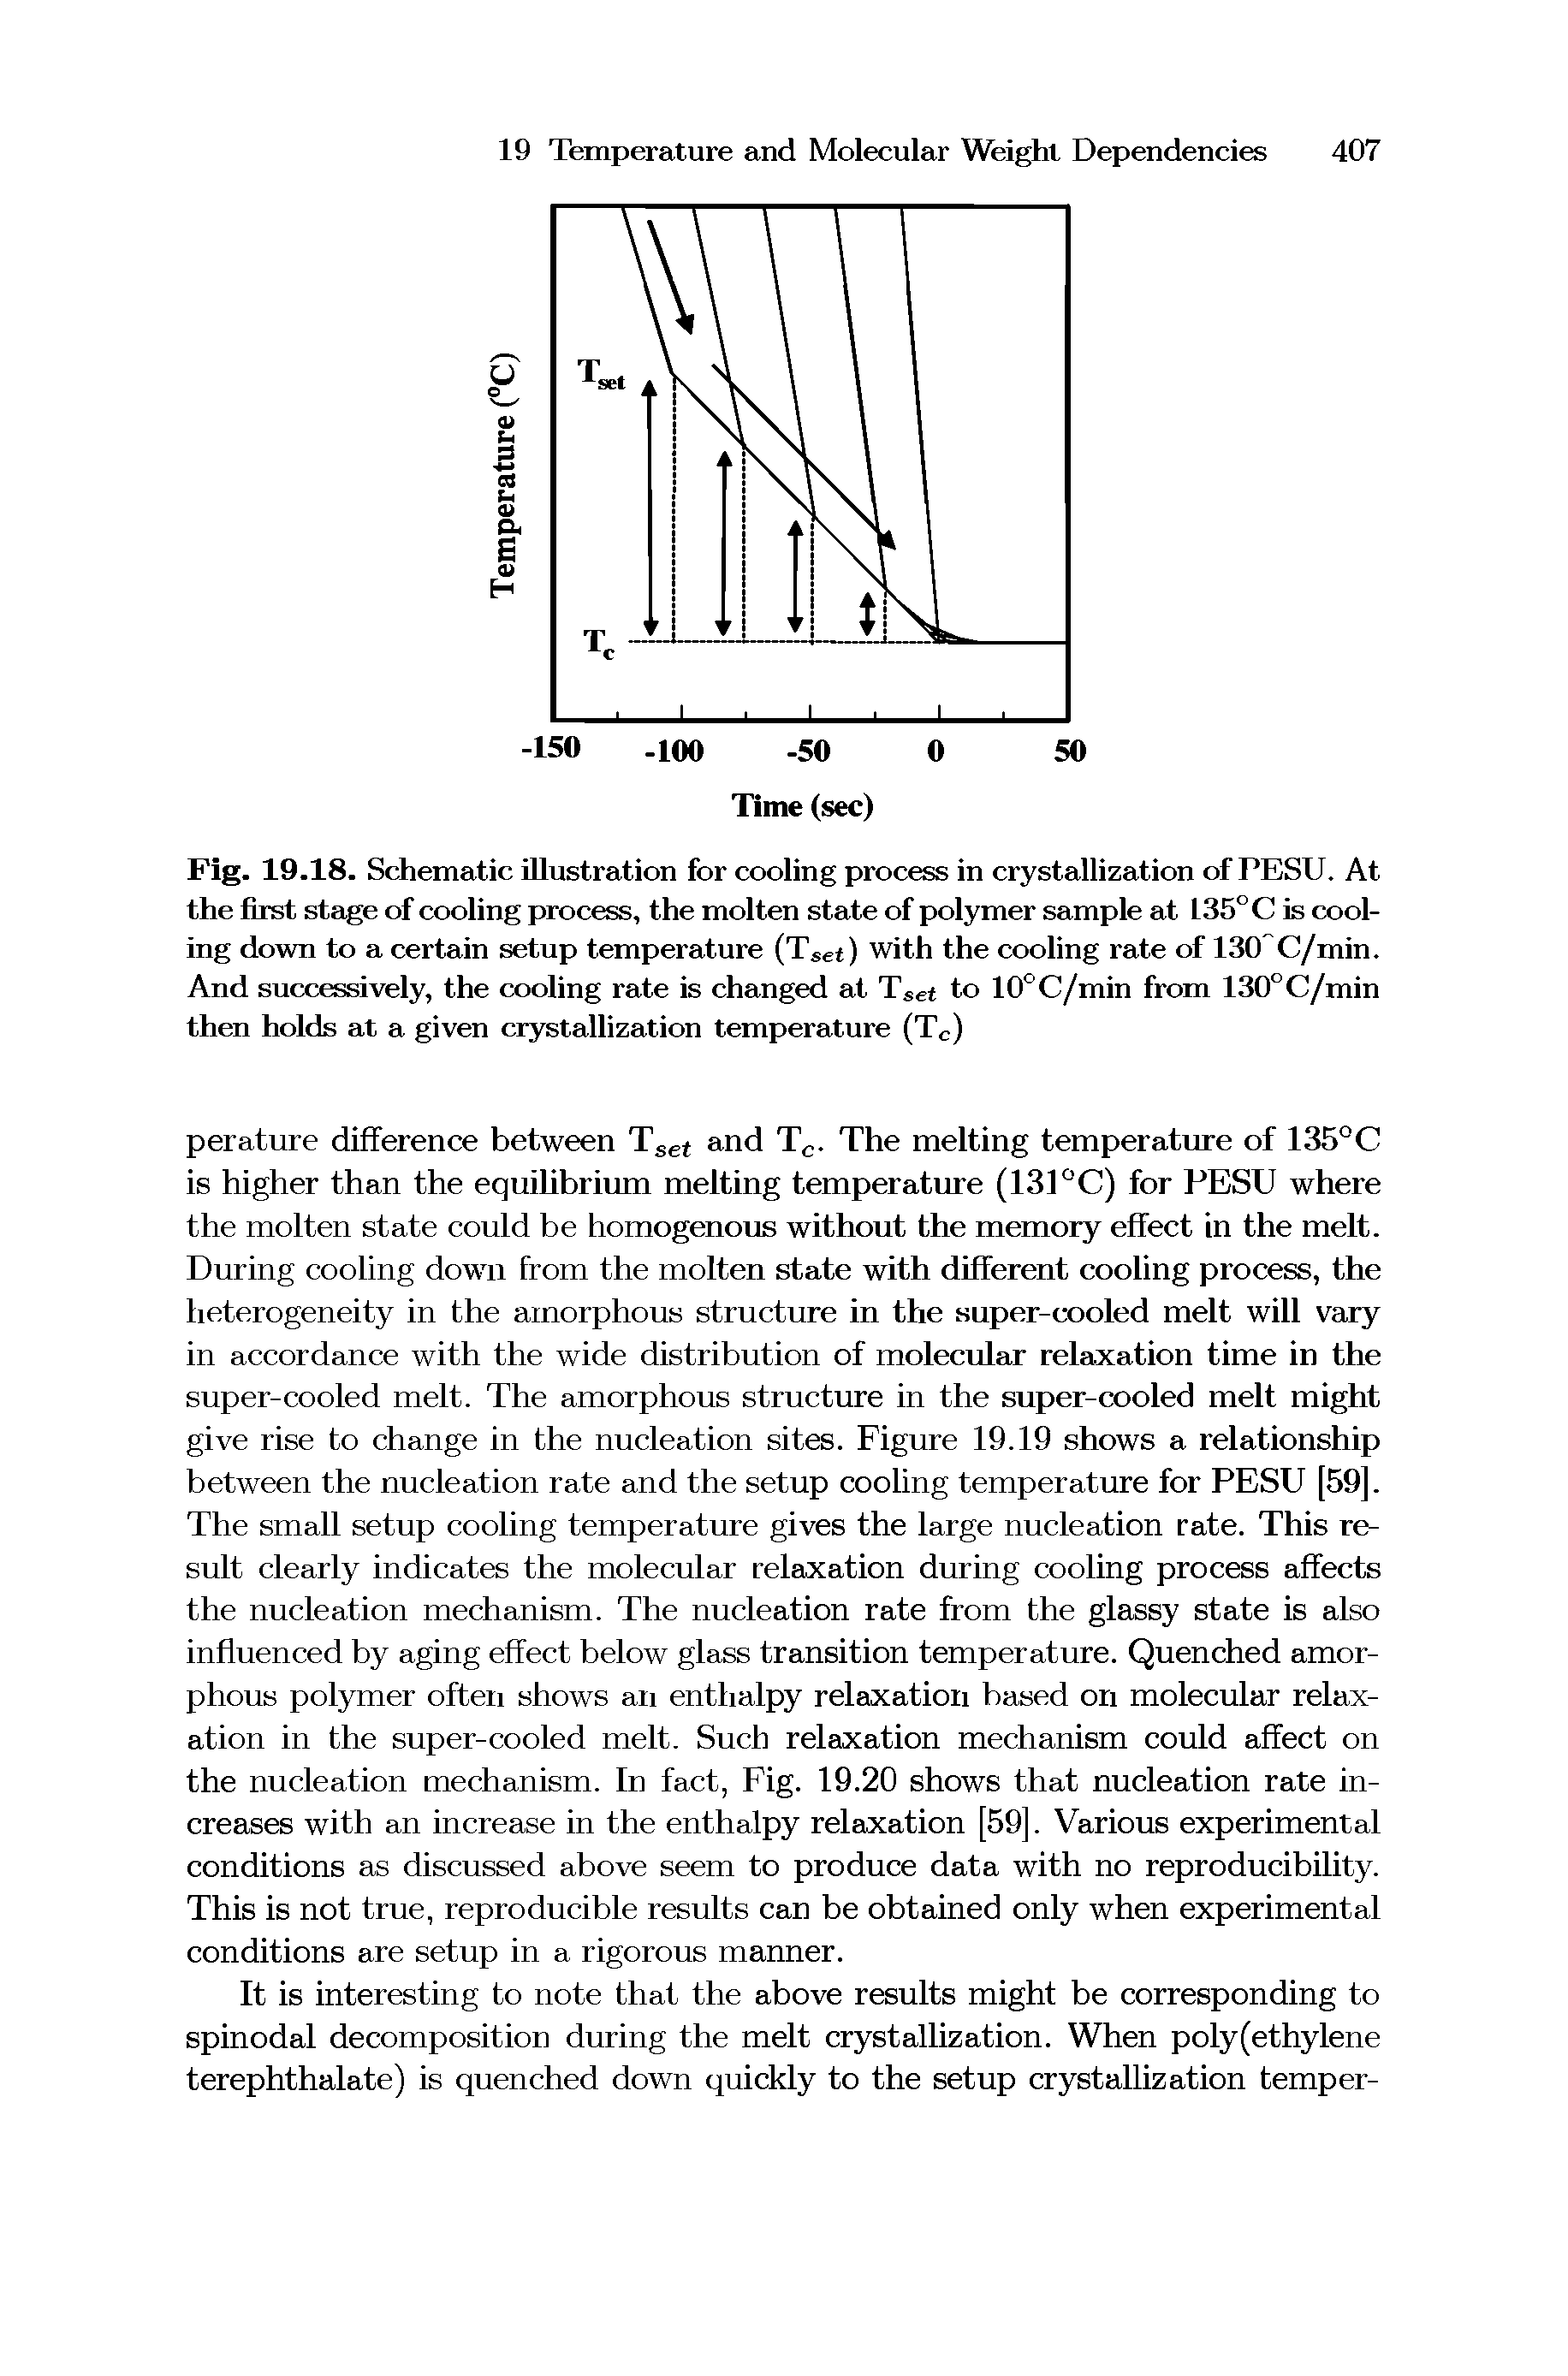 Fig. 19.18. Schematic illustration for cooling process in crystallization of PESU. At the first stage of cooling process, the molten state of polymer sample at 135° C is cooling down to a certain setup temperature (Tset) with the cooling rate of ISO C/min. And successively, the cooling rate is changed at Tset to 10°C/min from 130°C/min then holds at a given crystallization temperature (Tc)...